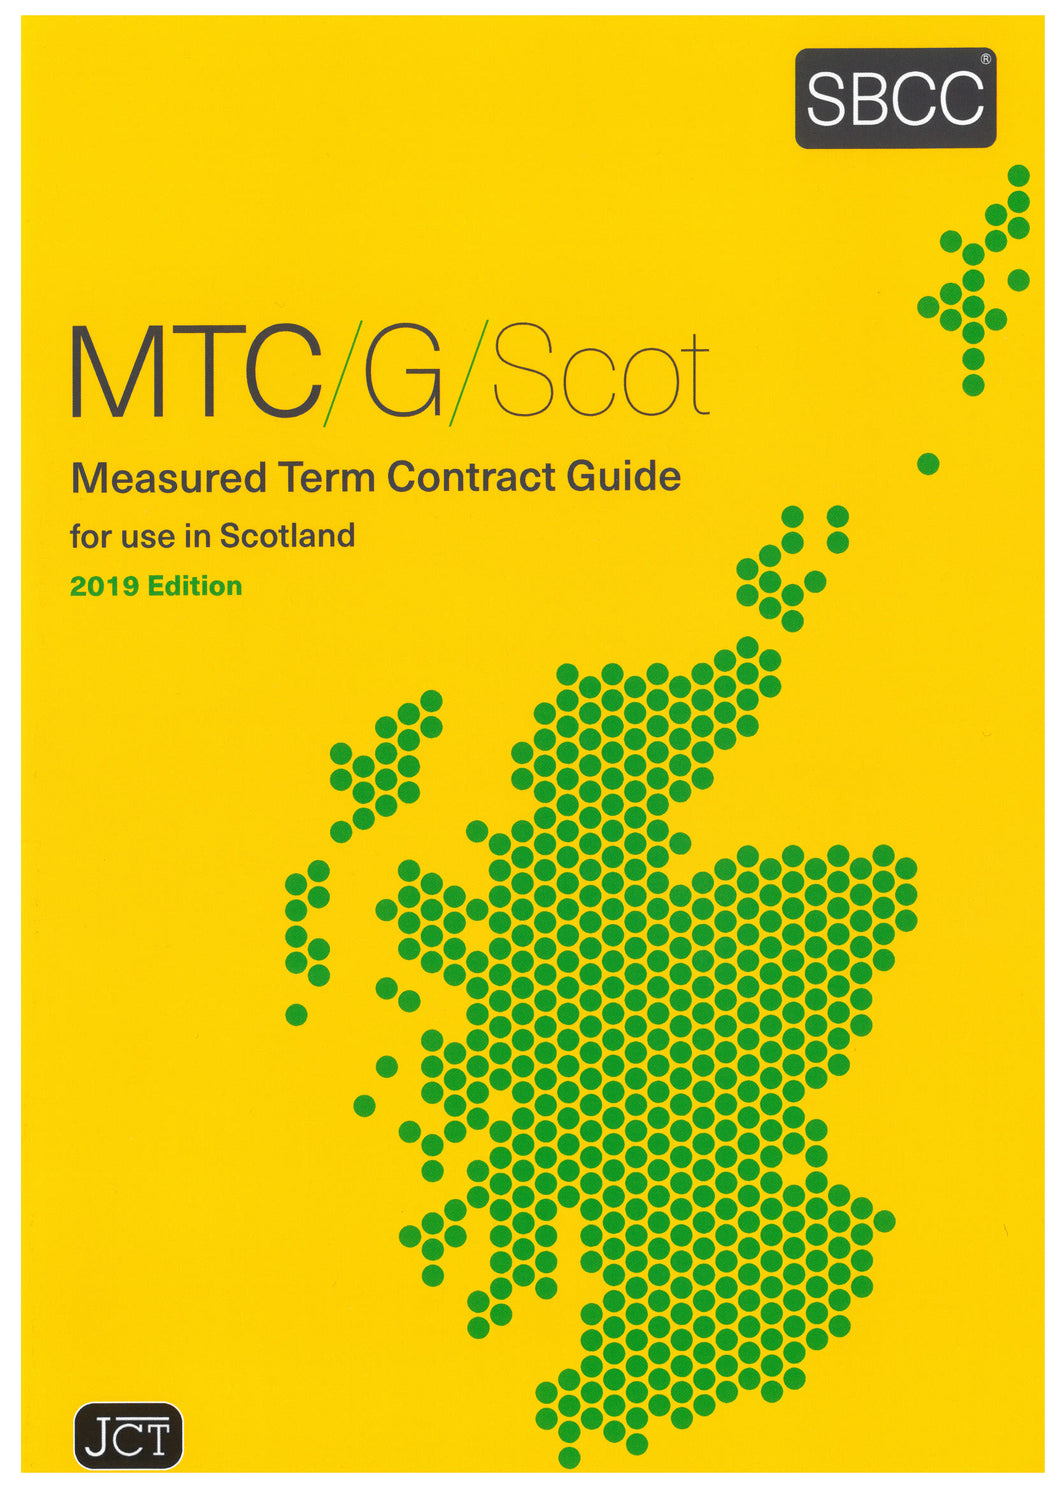 Measured Term Contract Guide for use in Scotland 2019